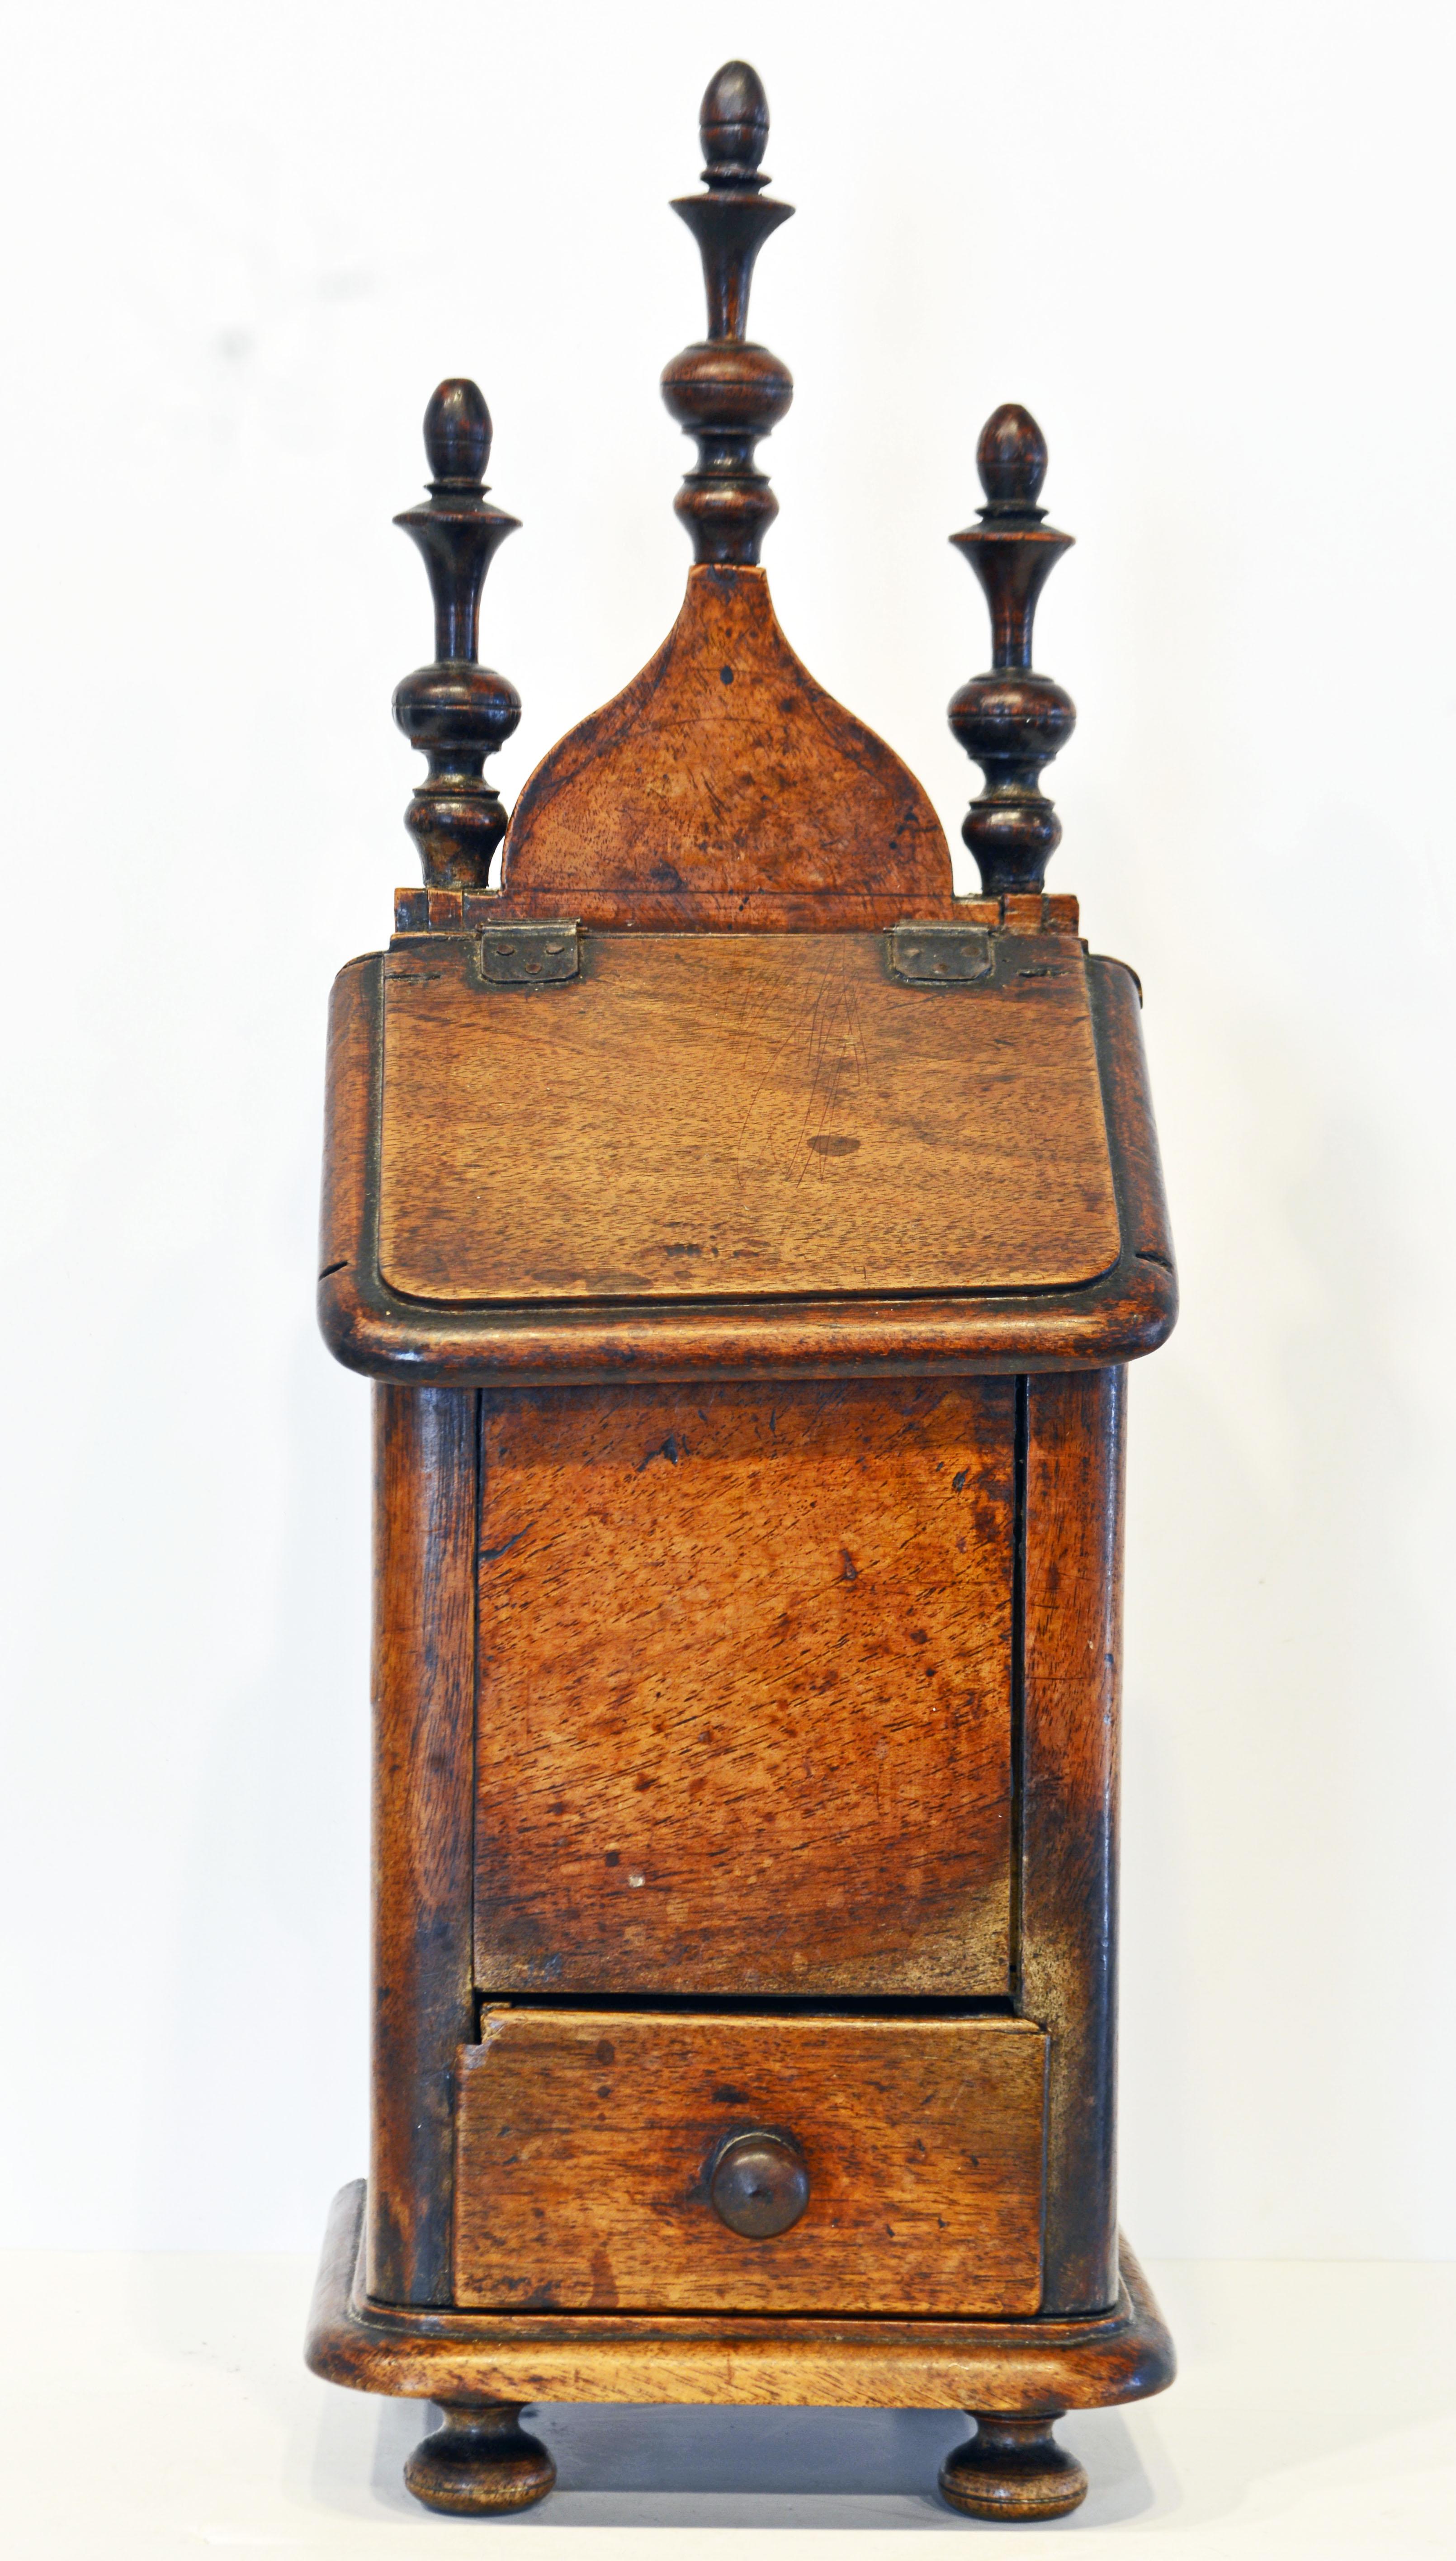 Authentic French Provincial walnut salt box or 'boite s sel' dating to circa 1830. It features a Gothic style pediment adorned by three turned finials above an iron hinged slanted lid and a small drawer standing on four turned bun feet. The box has